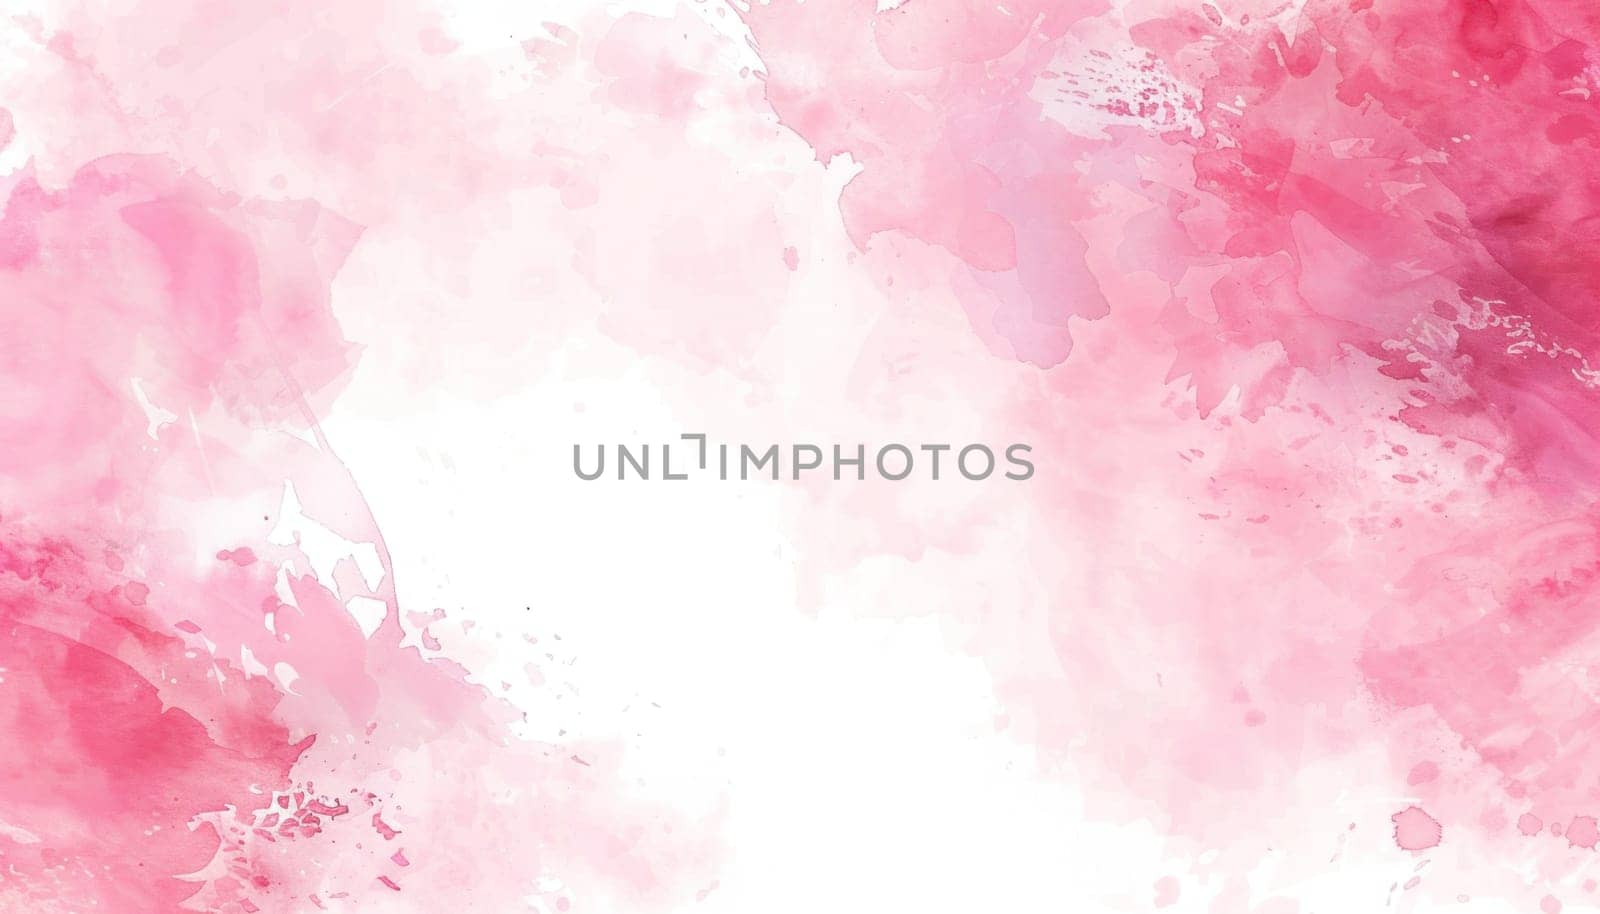 Abstract watercolor pink background with white space for text or image, ideal for travel or beauty concepts by Vichizh